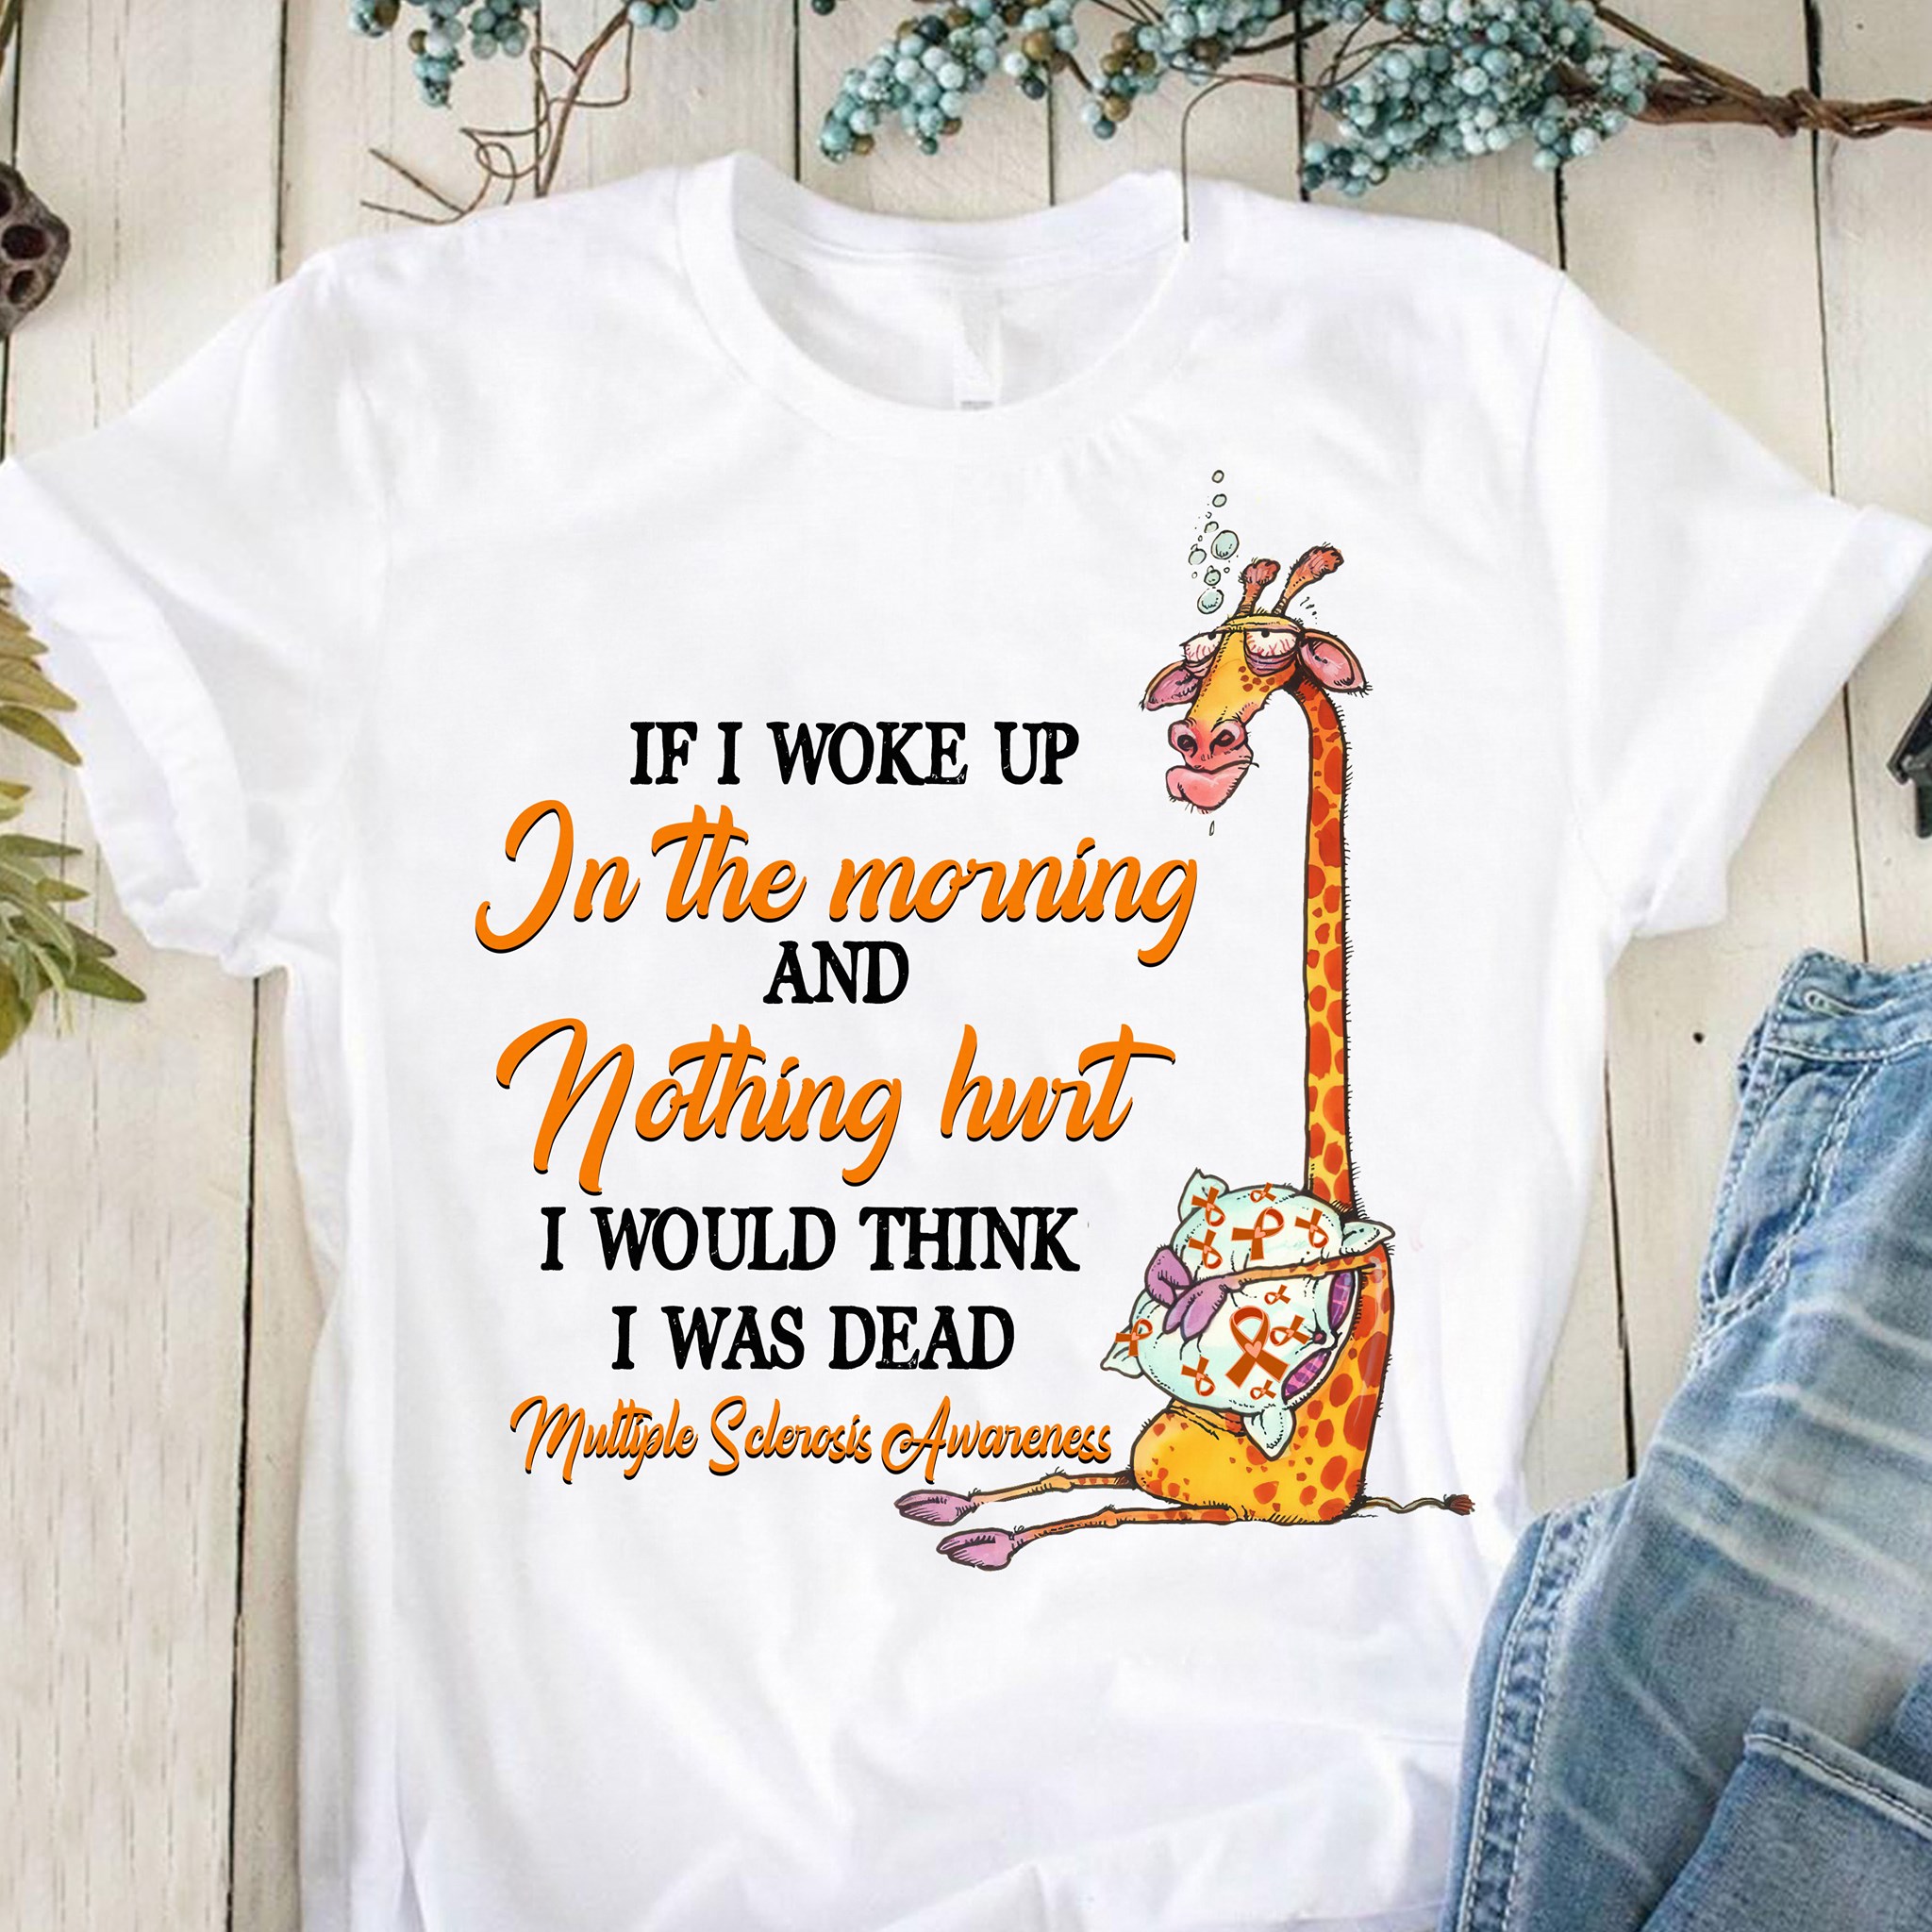 If I woke up in the morning and nothing hurt - Multiple sclerosis awareness